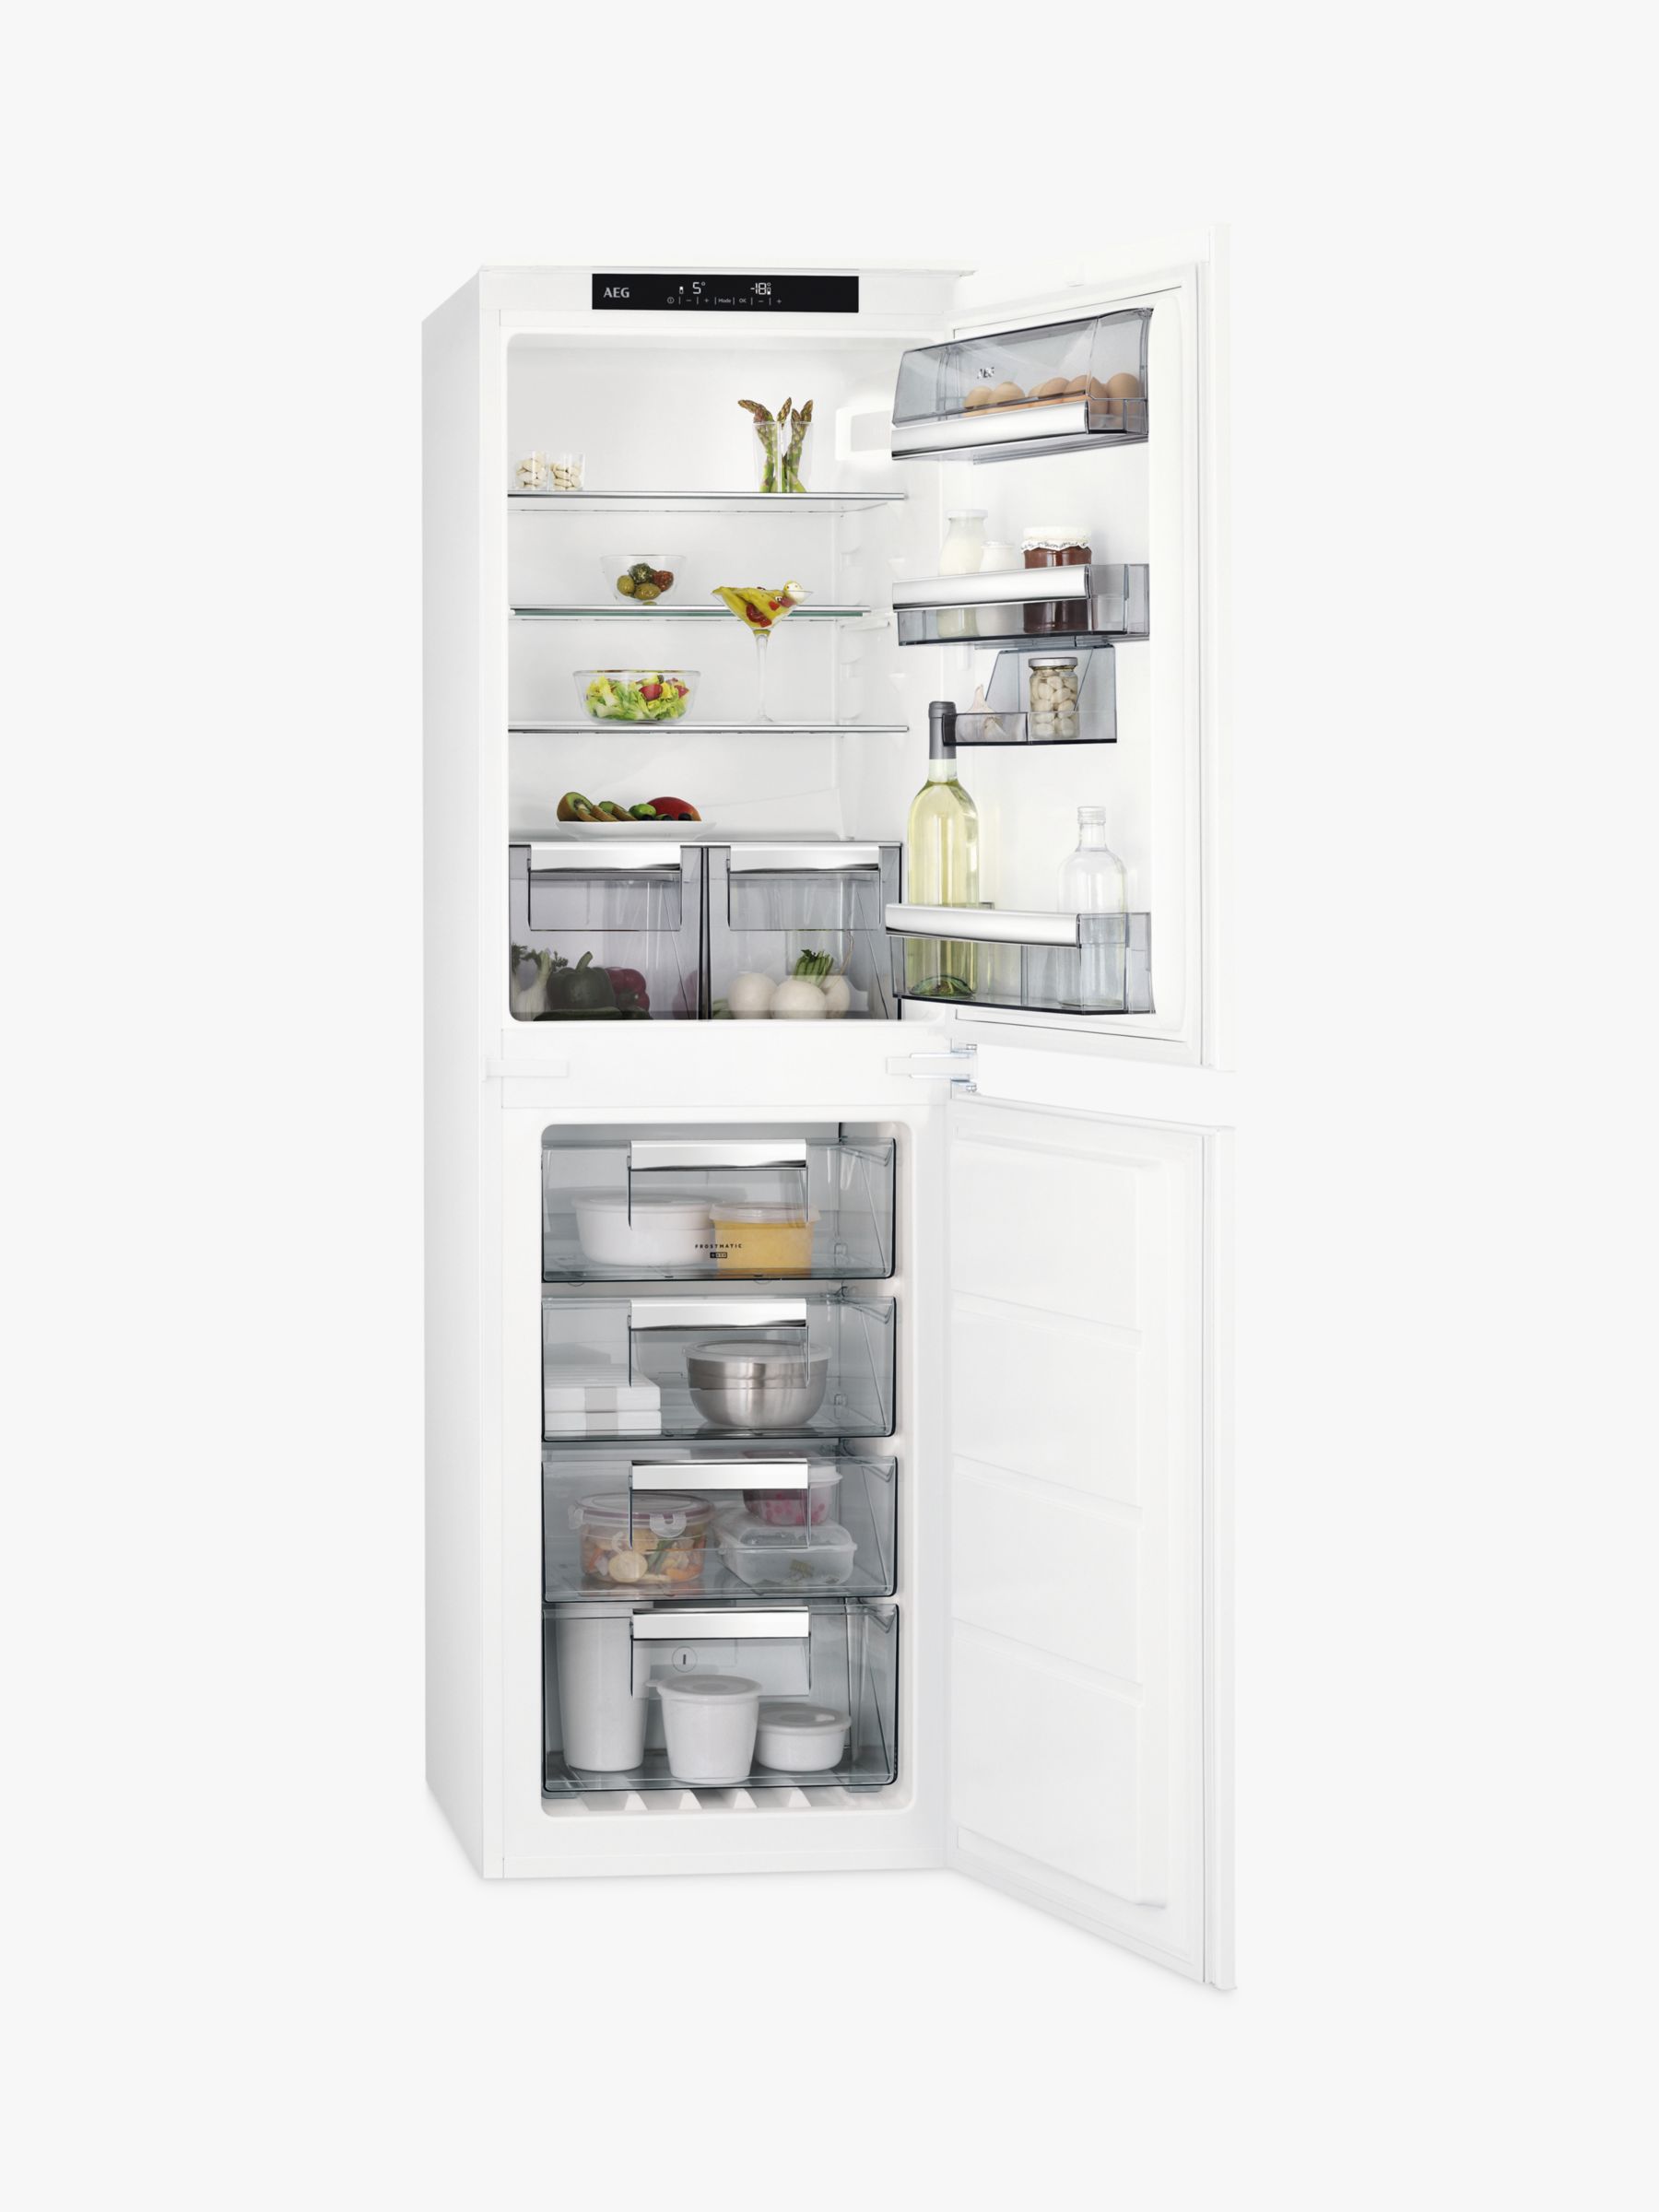 AEG SCE8181VNS Integrated Fridge Freezer, A+ Energy Rating, 54cm Wide, White